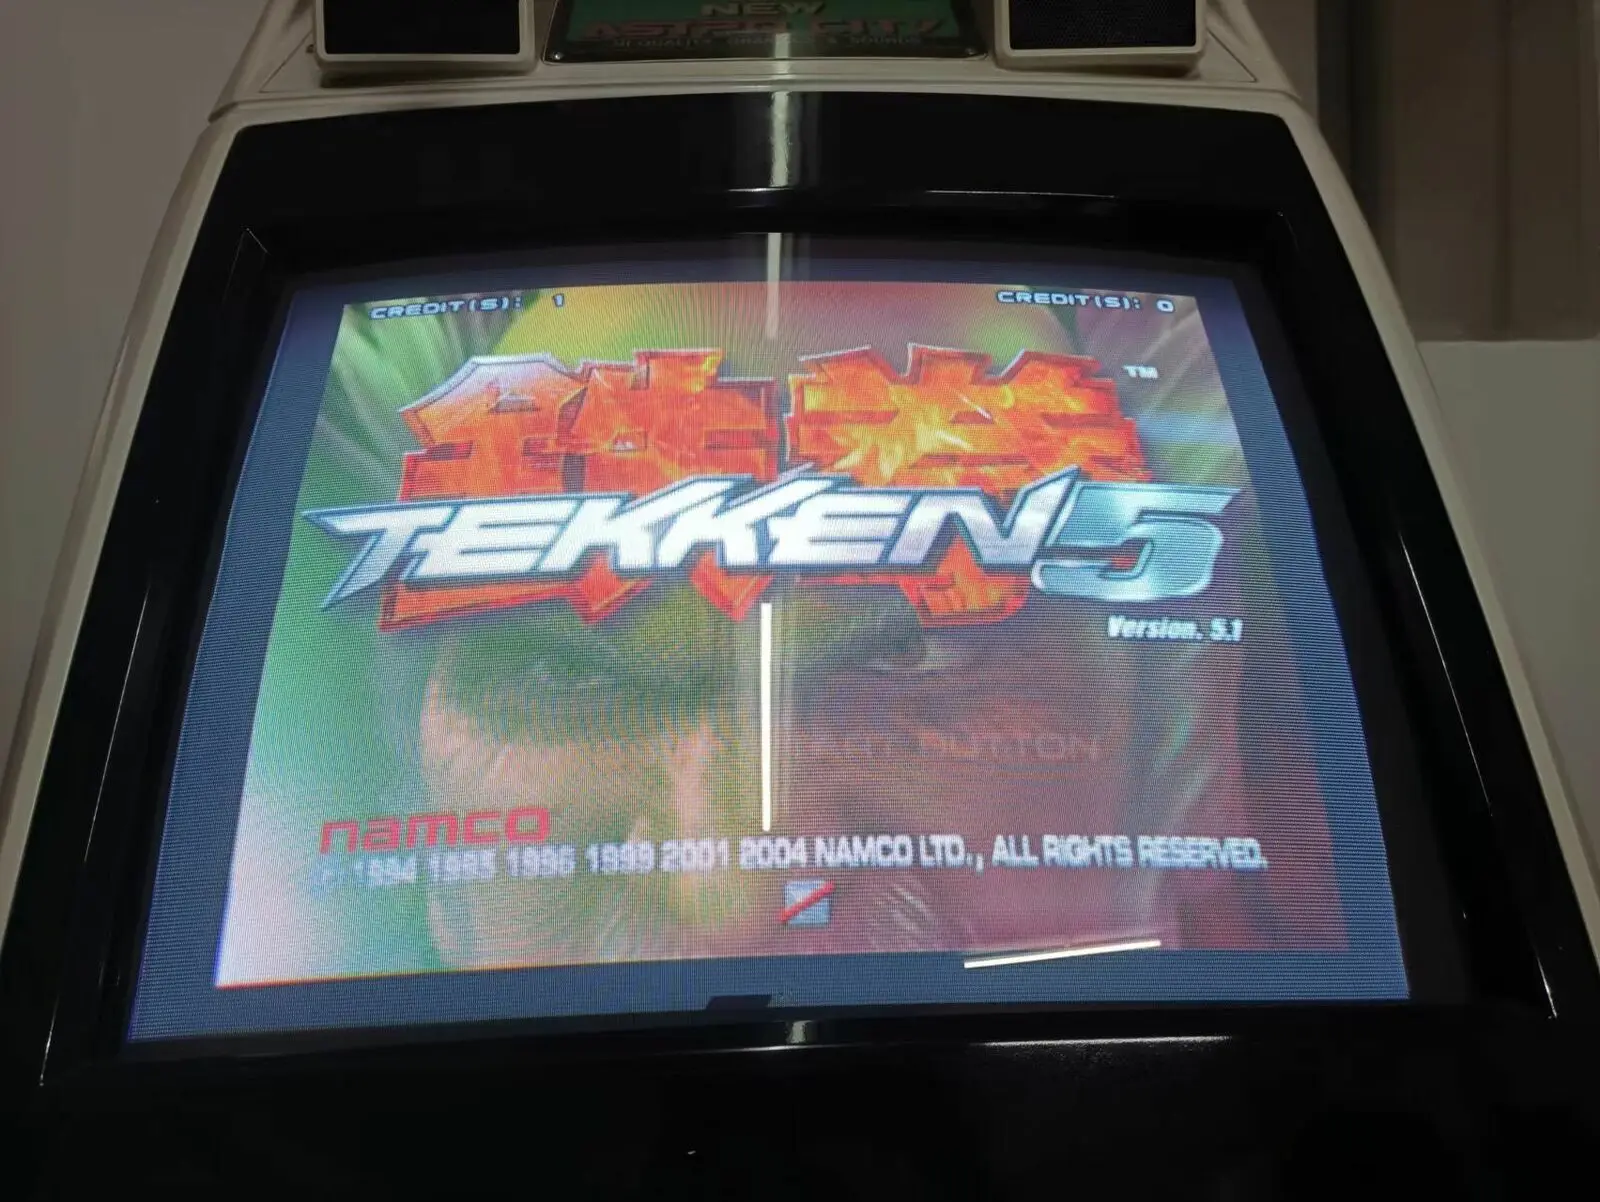 

Namco System 256 Console Motherboard with Tekken 5 Arcade Game Tested Working